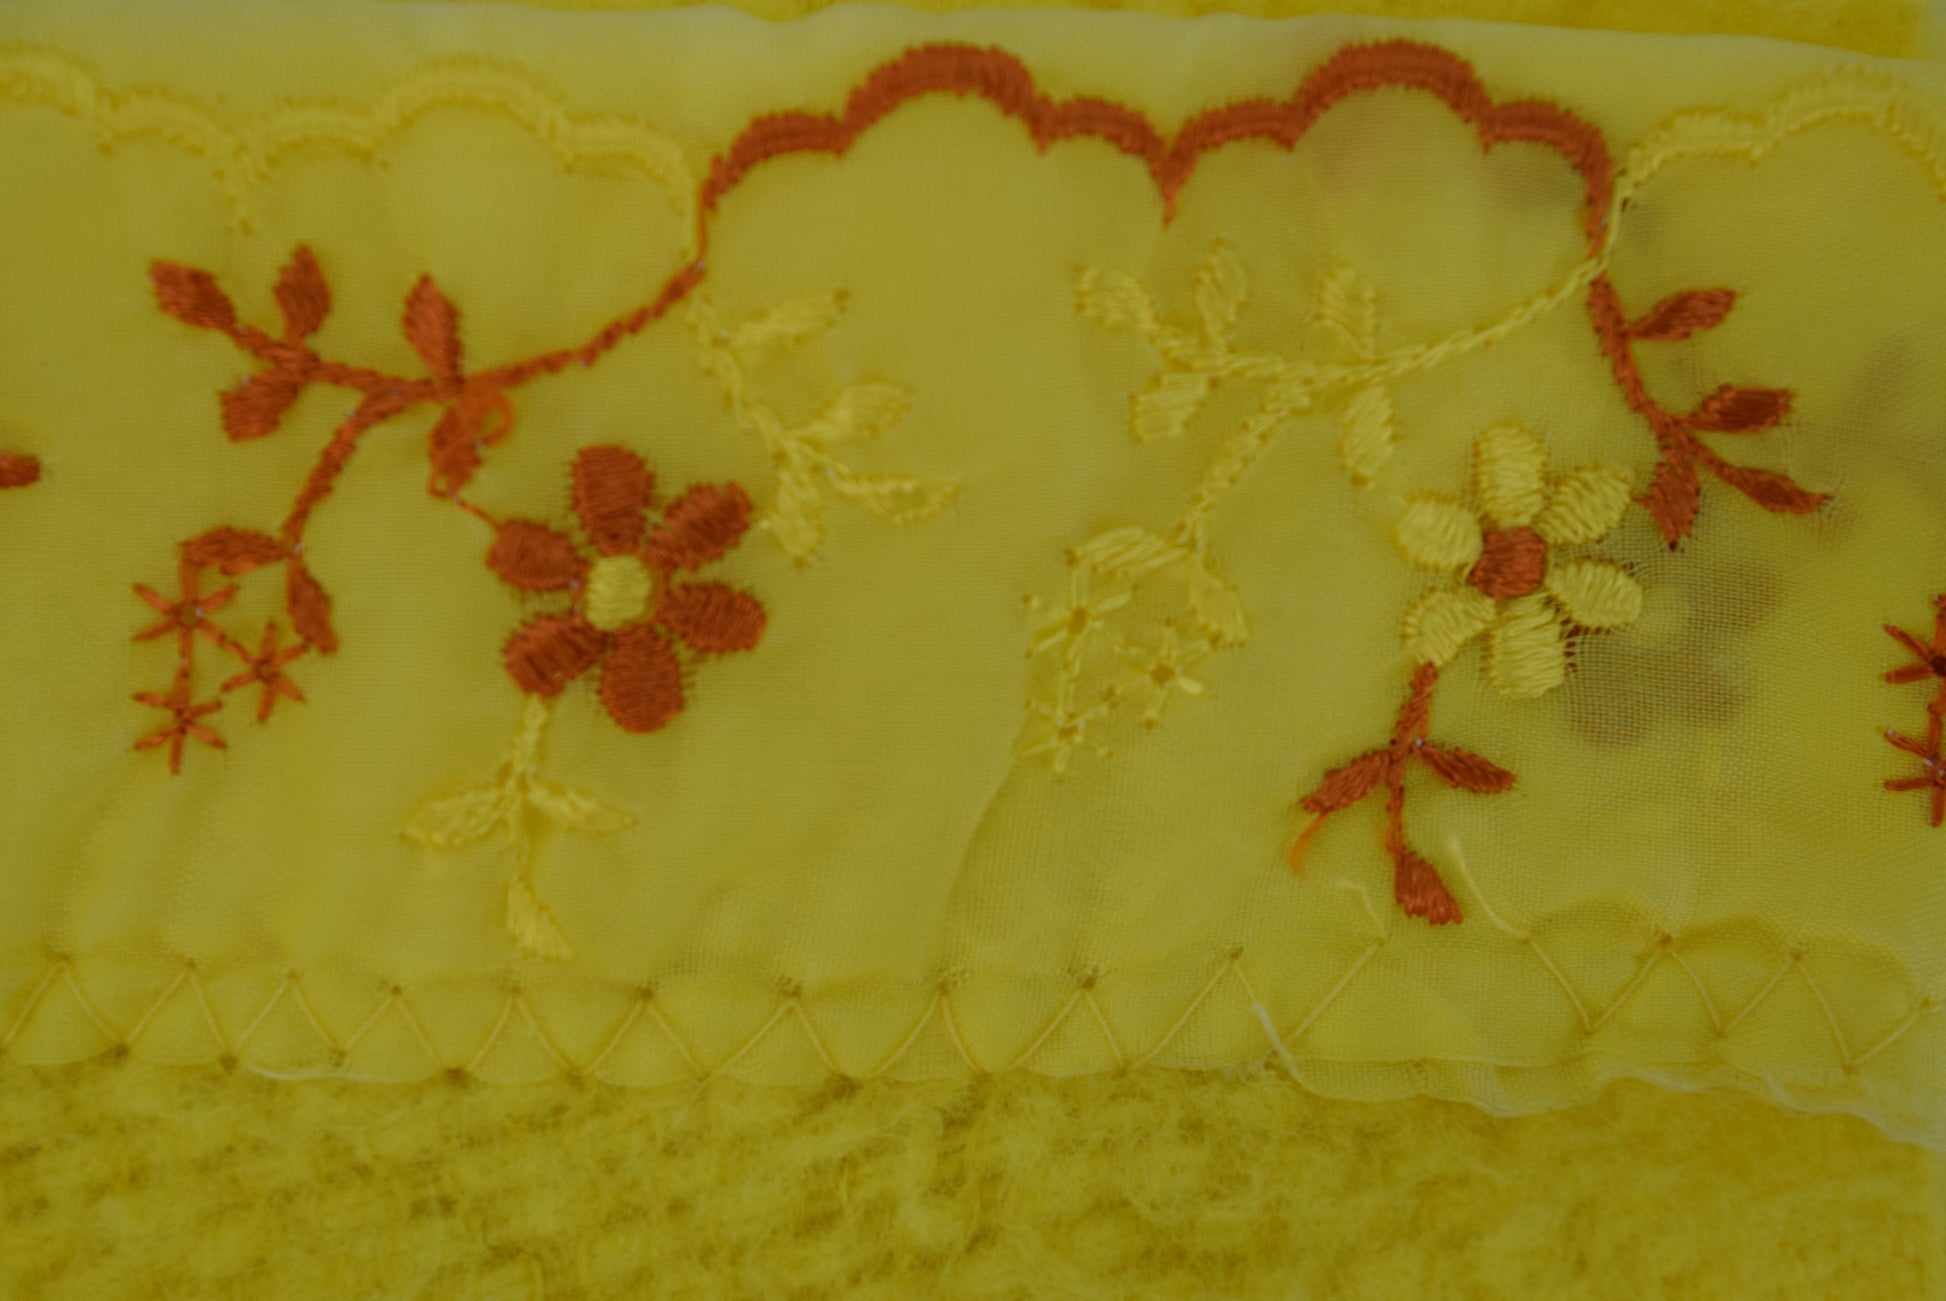 Acrylic Thermal Blanket for sale Lemon Yellow with Embroidered Binding Retro Bedding layering cover